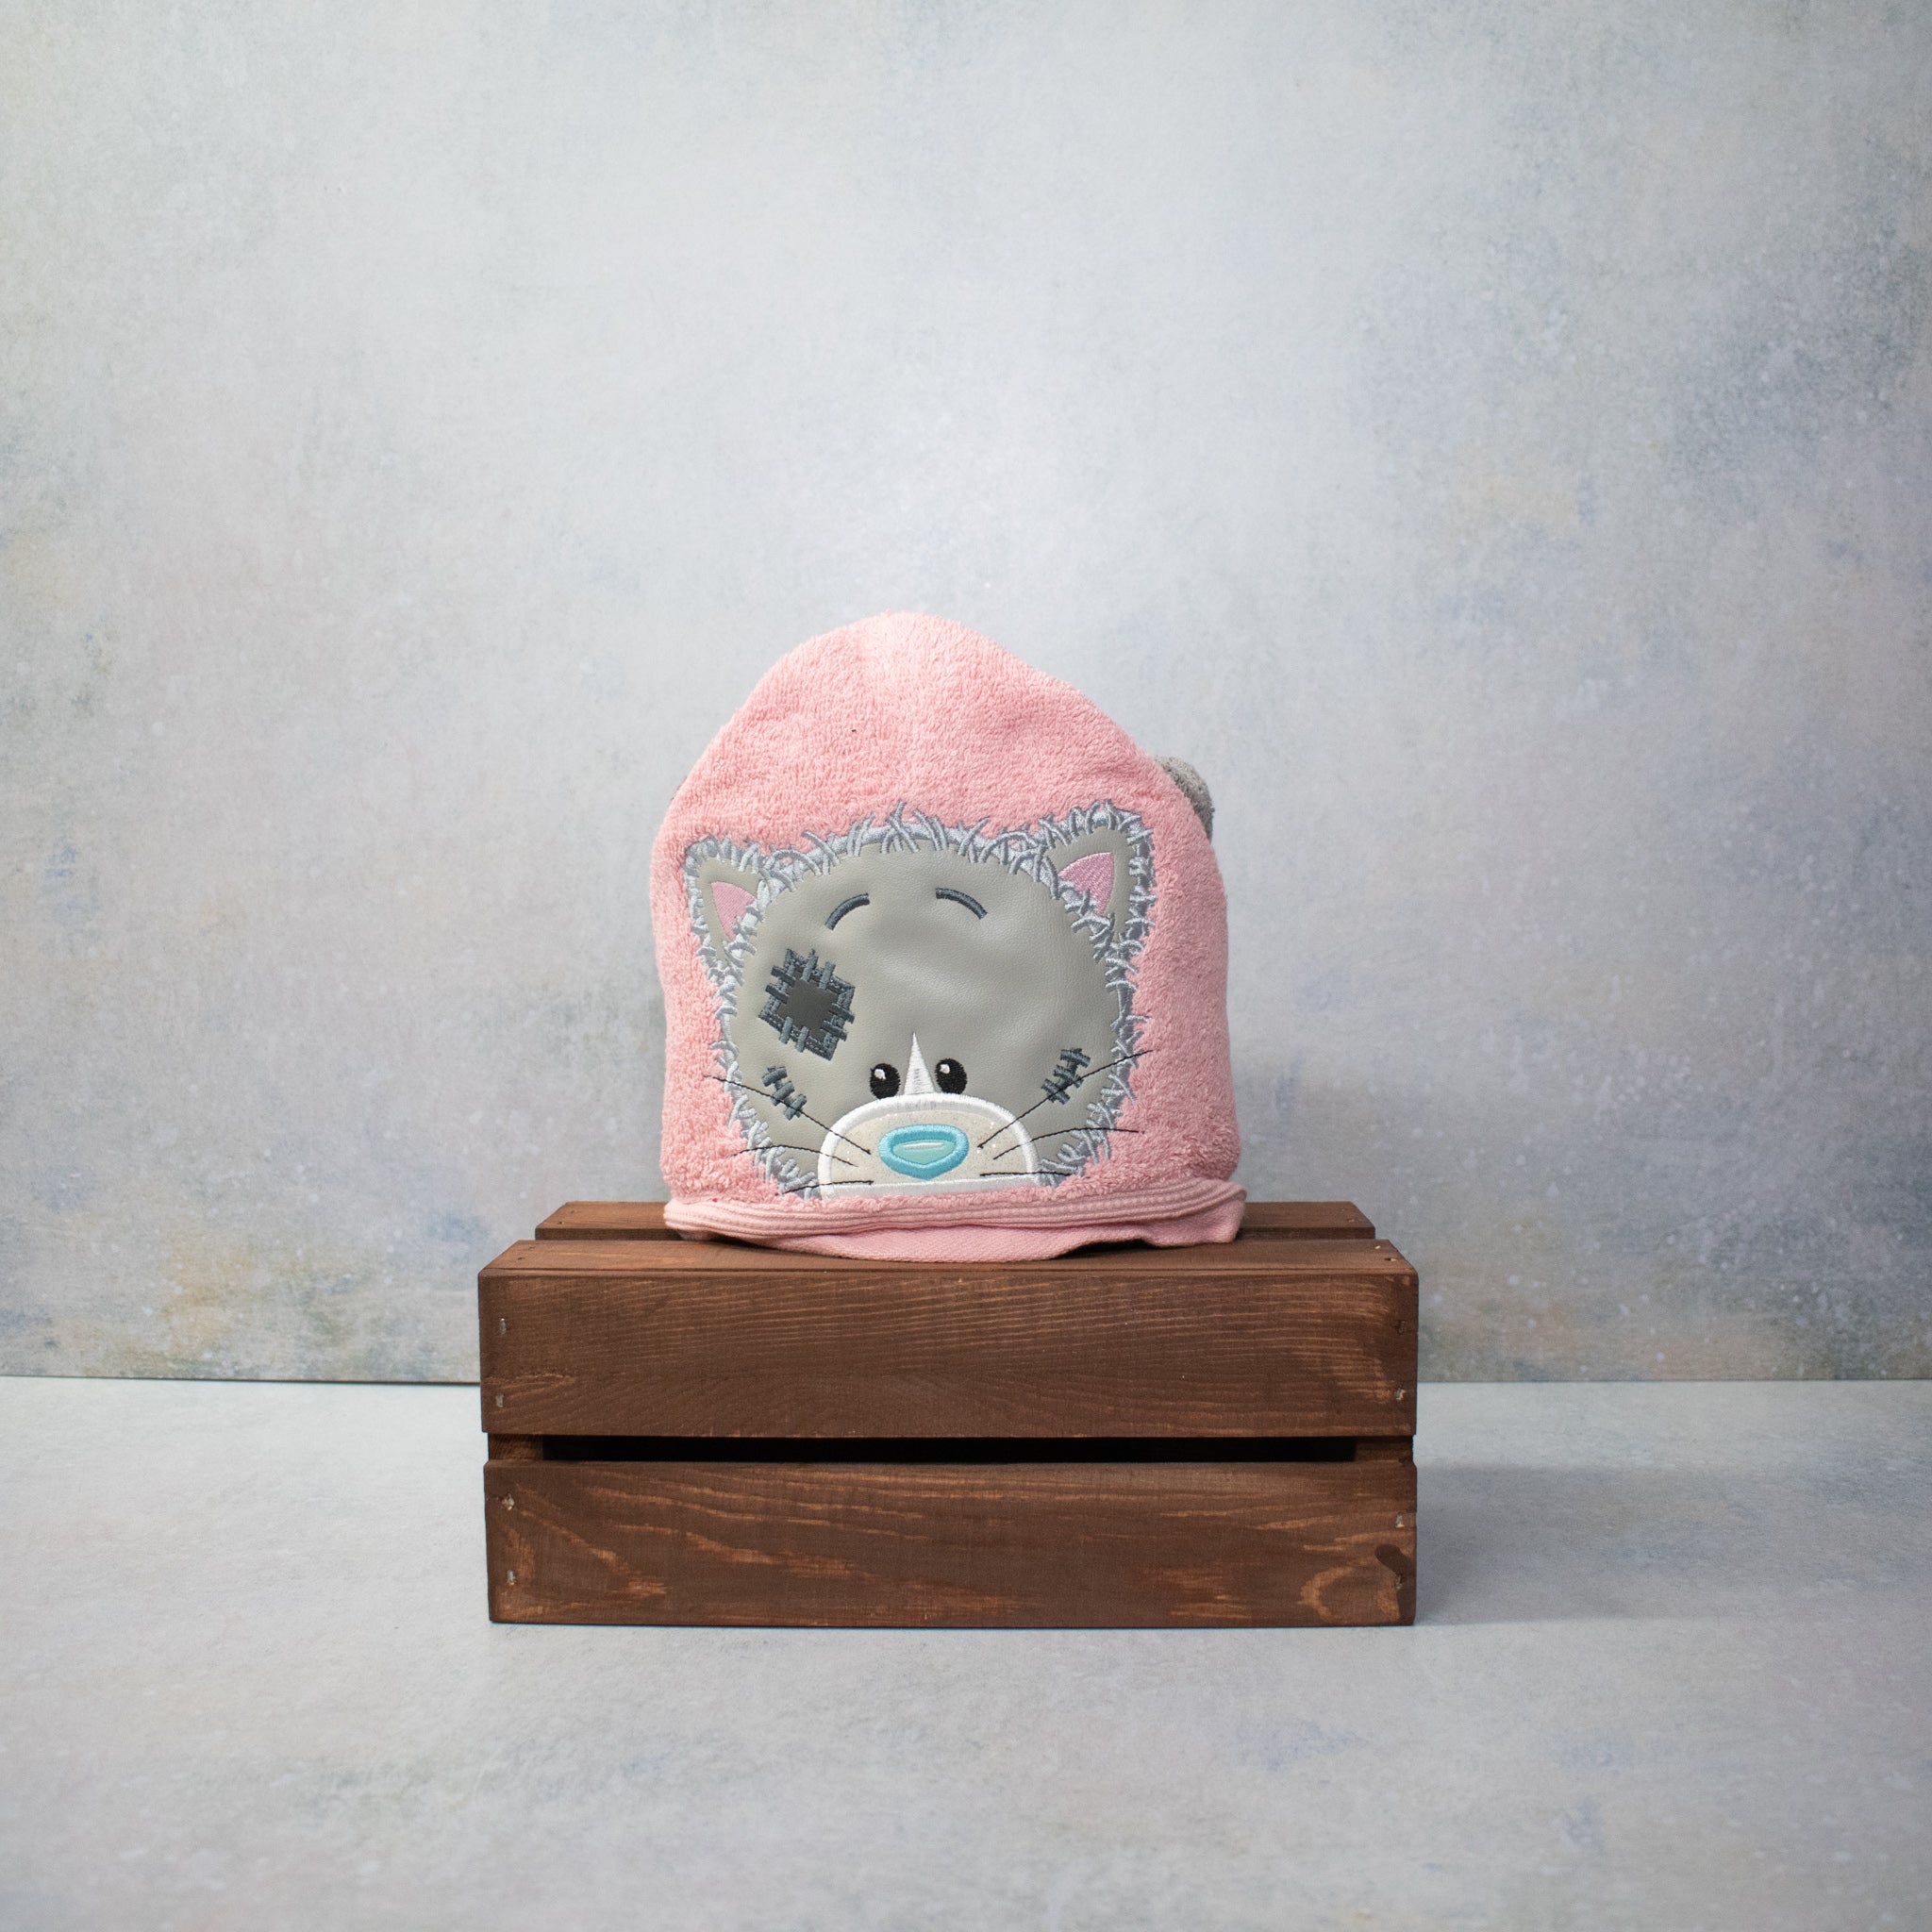 Tattered Kitty on Pink Hooded Bath Towel